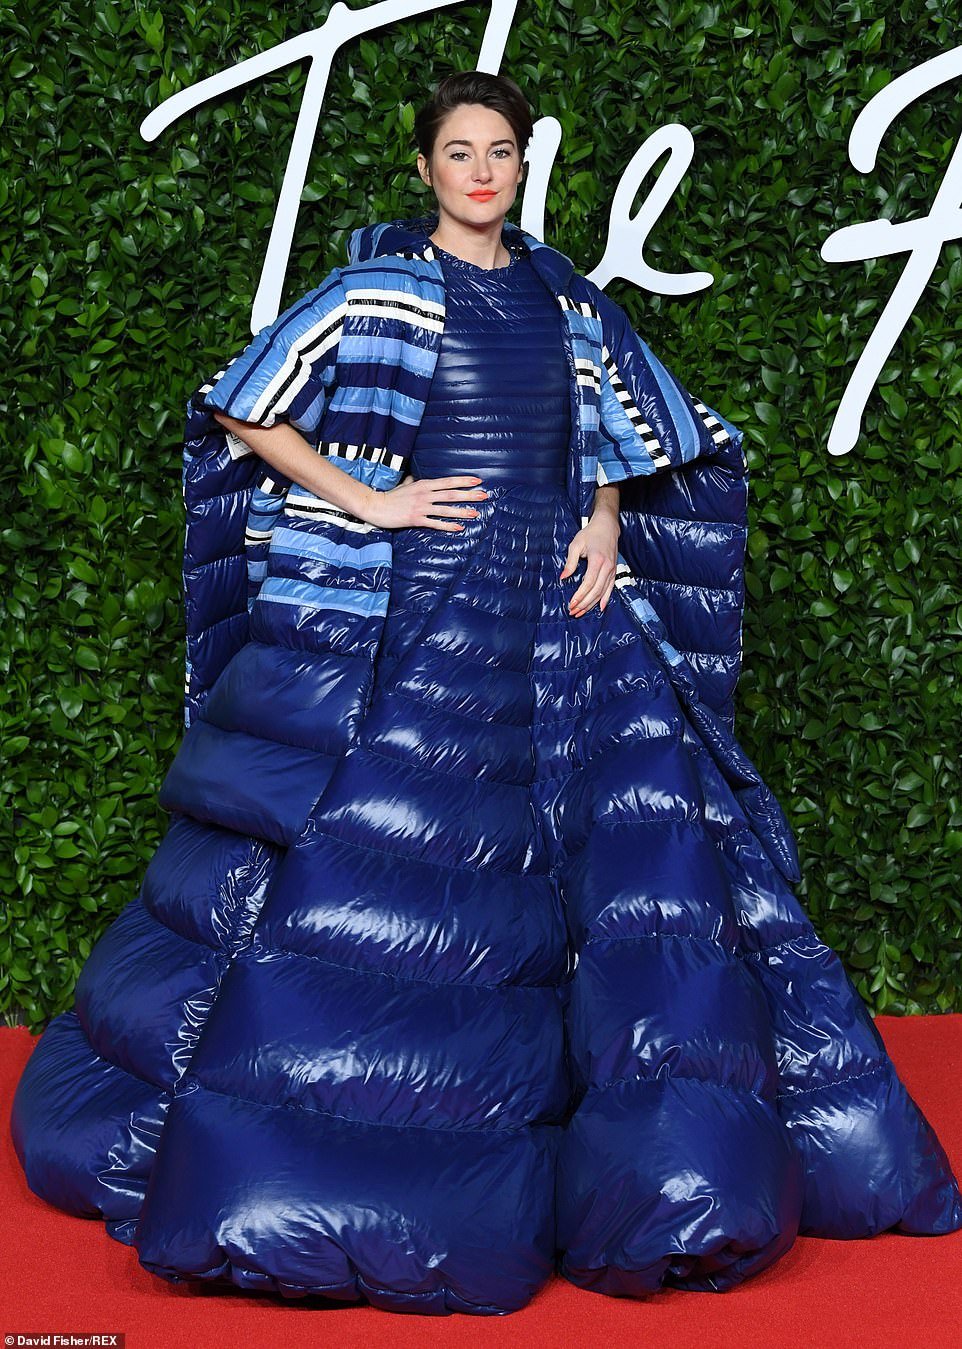 shailene-woodley-in-moncler-1-pierpaolo-piccioli-2019-british-the-fashion-awards